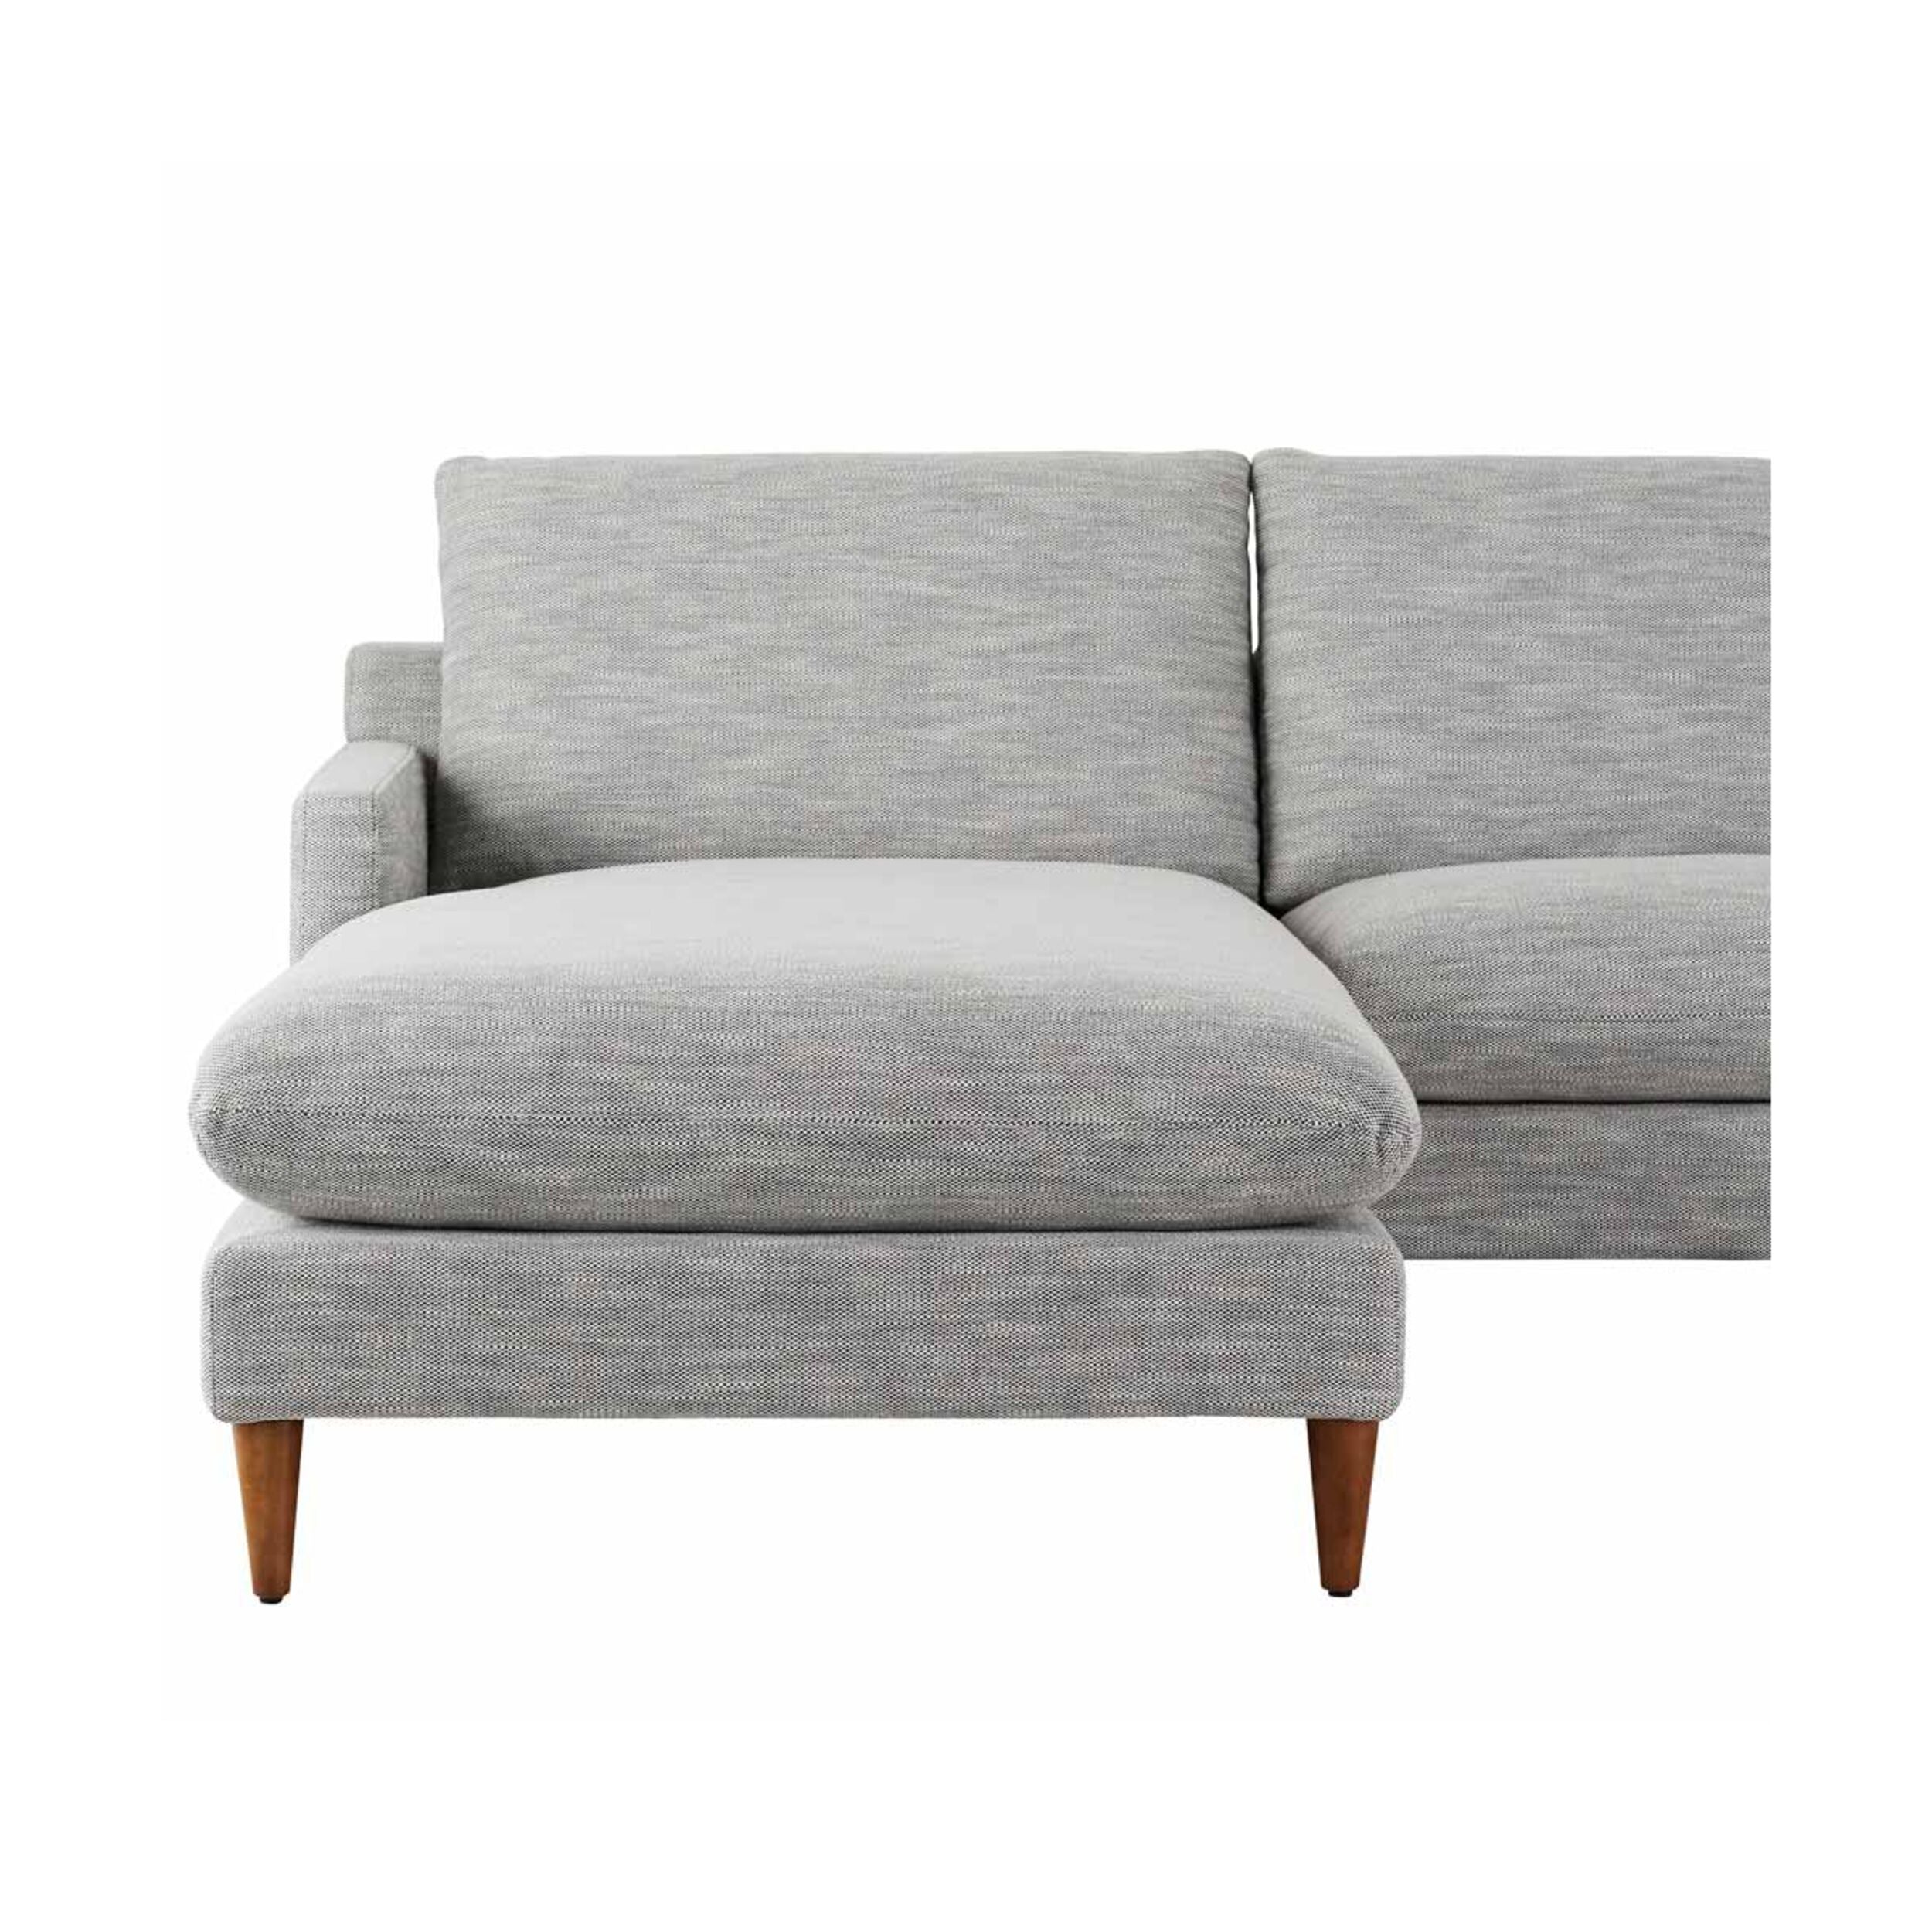 Easton 3 Seater Fabric Sofa with Left Chaise Grey Flint